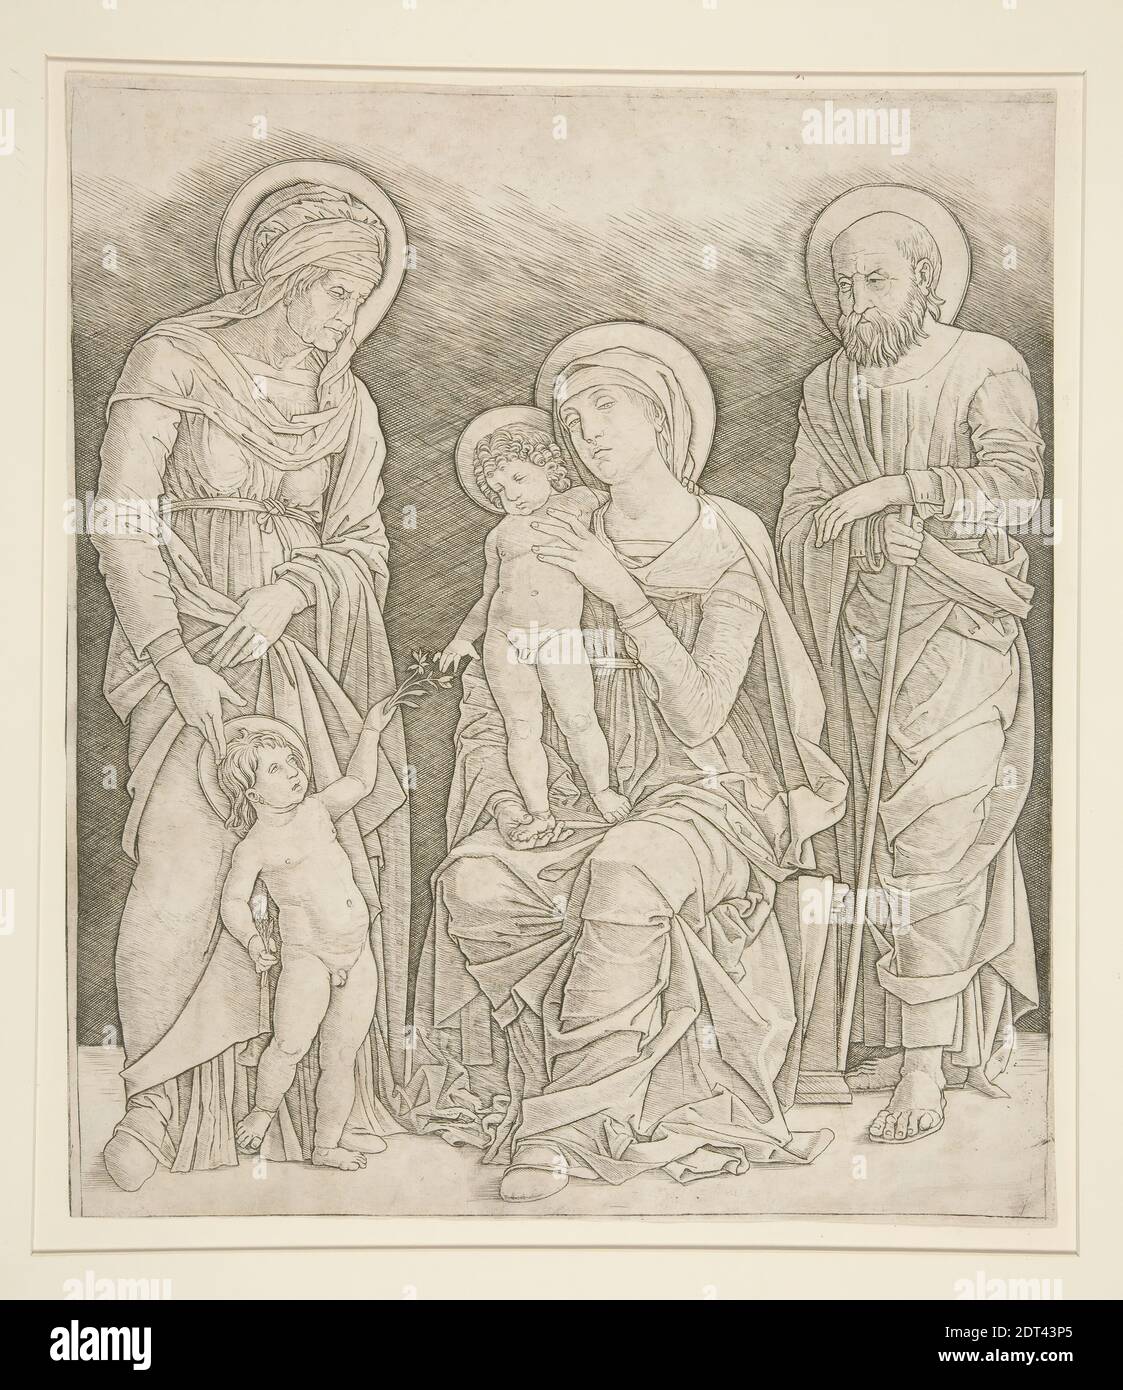 Engraver: Giovanni Antonio da Brescia, Italian, 1470–1520, After: Andrea Mantegna, Italian, ca. 1431–1506, The Holy Family with St. Elizabeth and the Young John the Baptist, ca. 1495–1500, Engraving, Made in Italy, Italian, 15th–16th century, Works on Paper - Prints Stock Photo